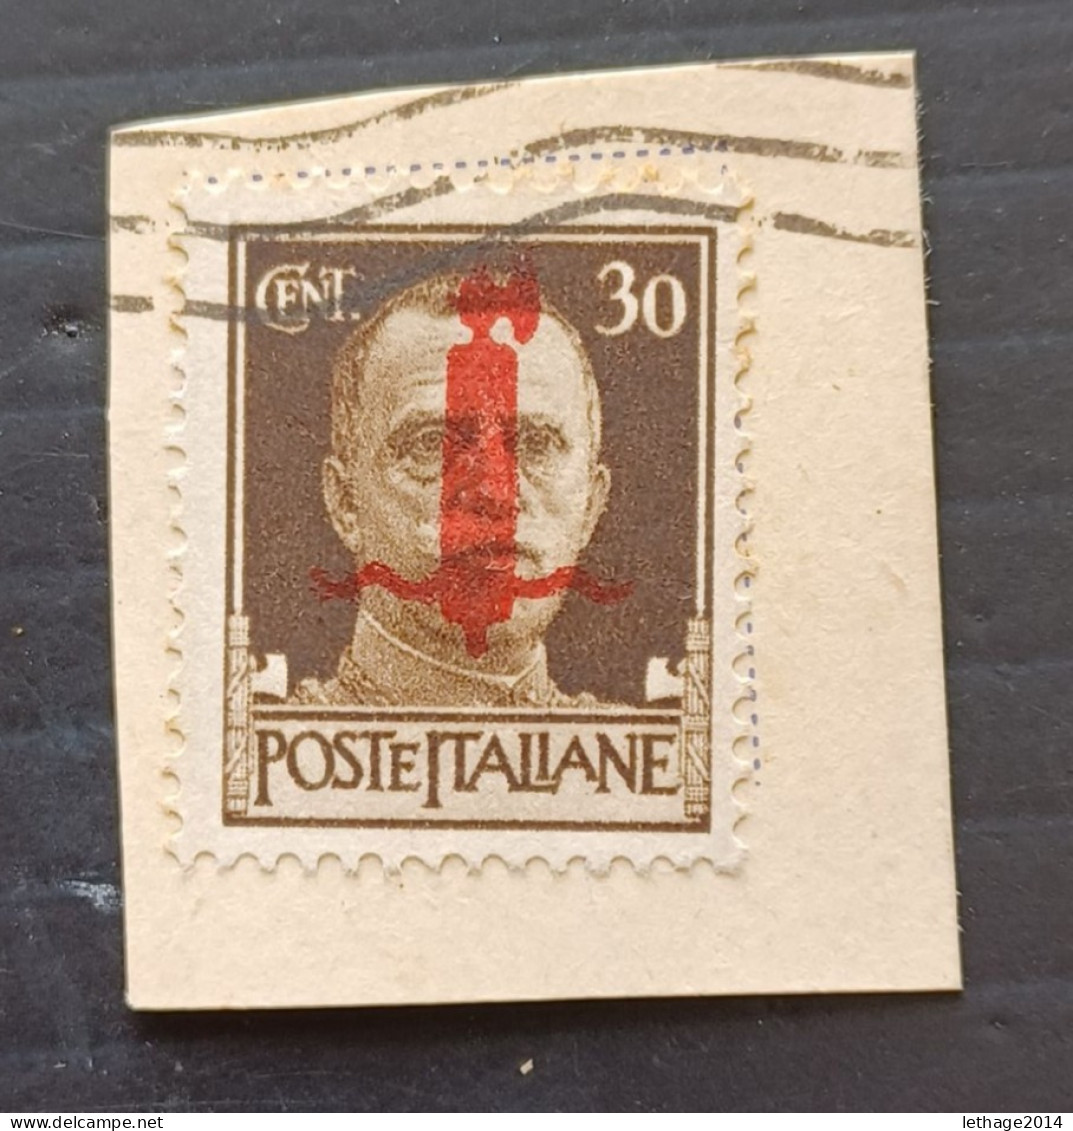 REGNO D ITALIA 1944 SERIE IMPERIALE SASS. N 492 --- GIULY - Gebraucht